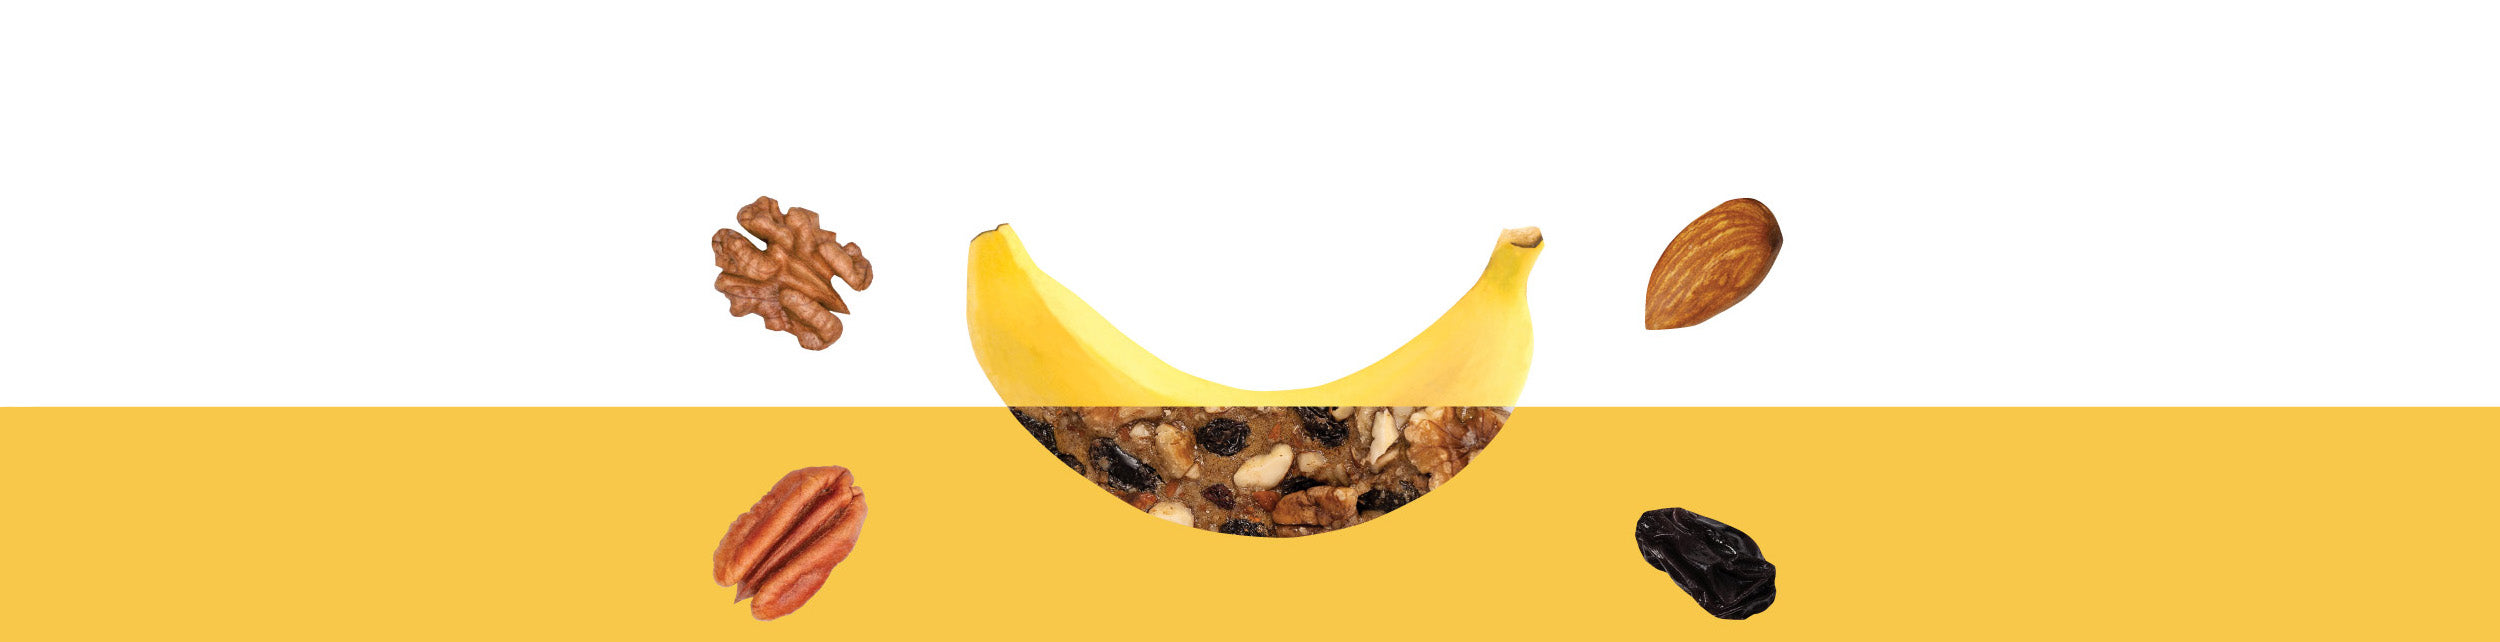 An organic banana surrounded by tree nuts and a raisin. The banana is split horizontally, showing monkey brittle inside it. 